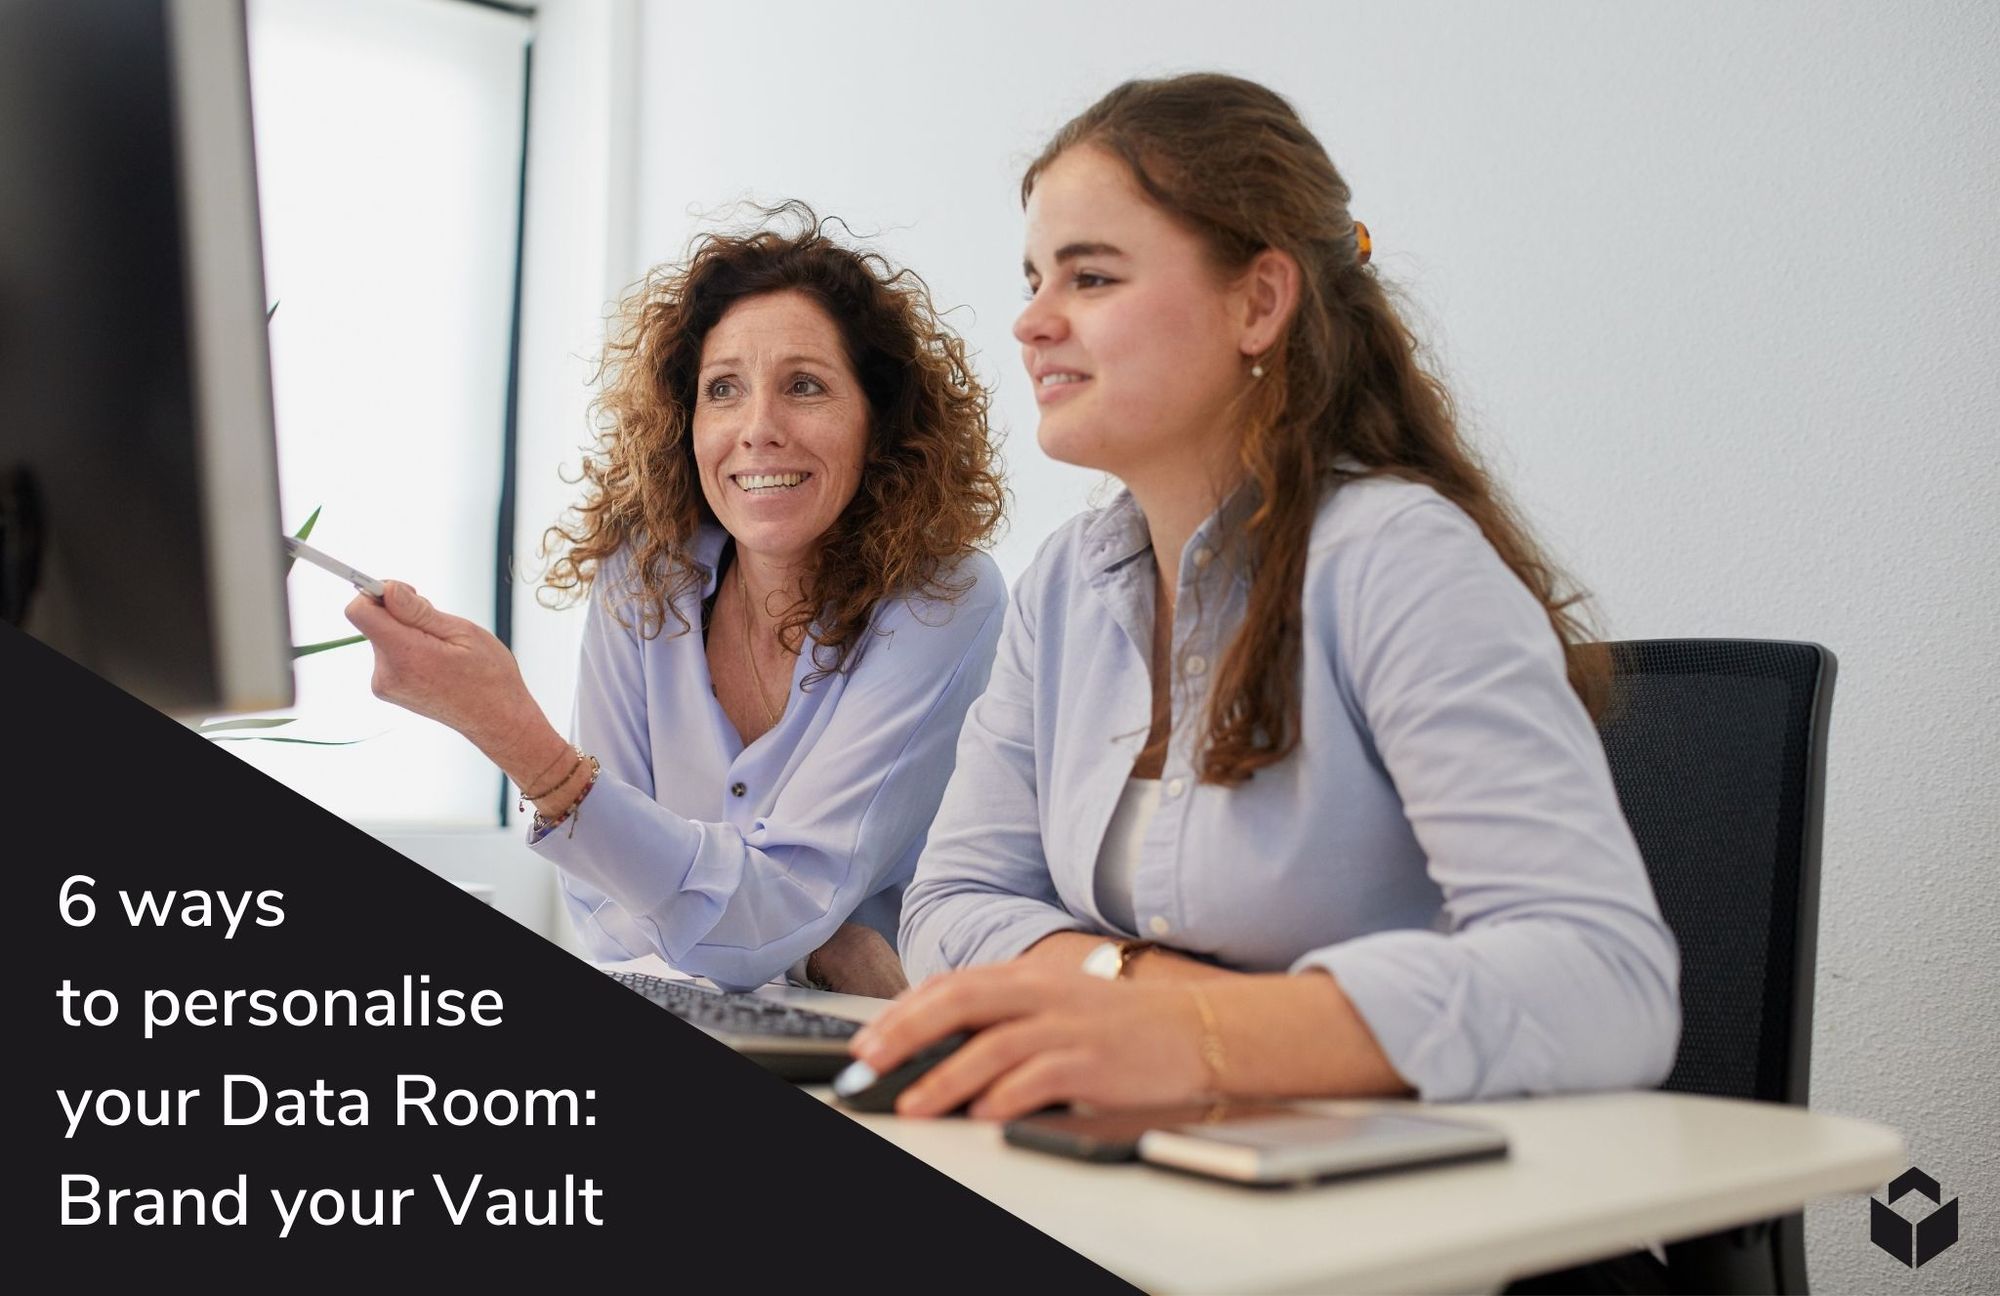 6 ways to personalise your Data Room: Brand your Vault